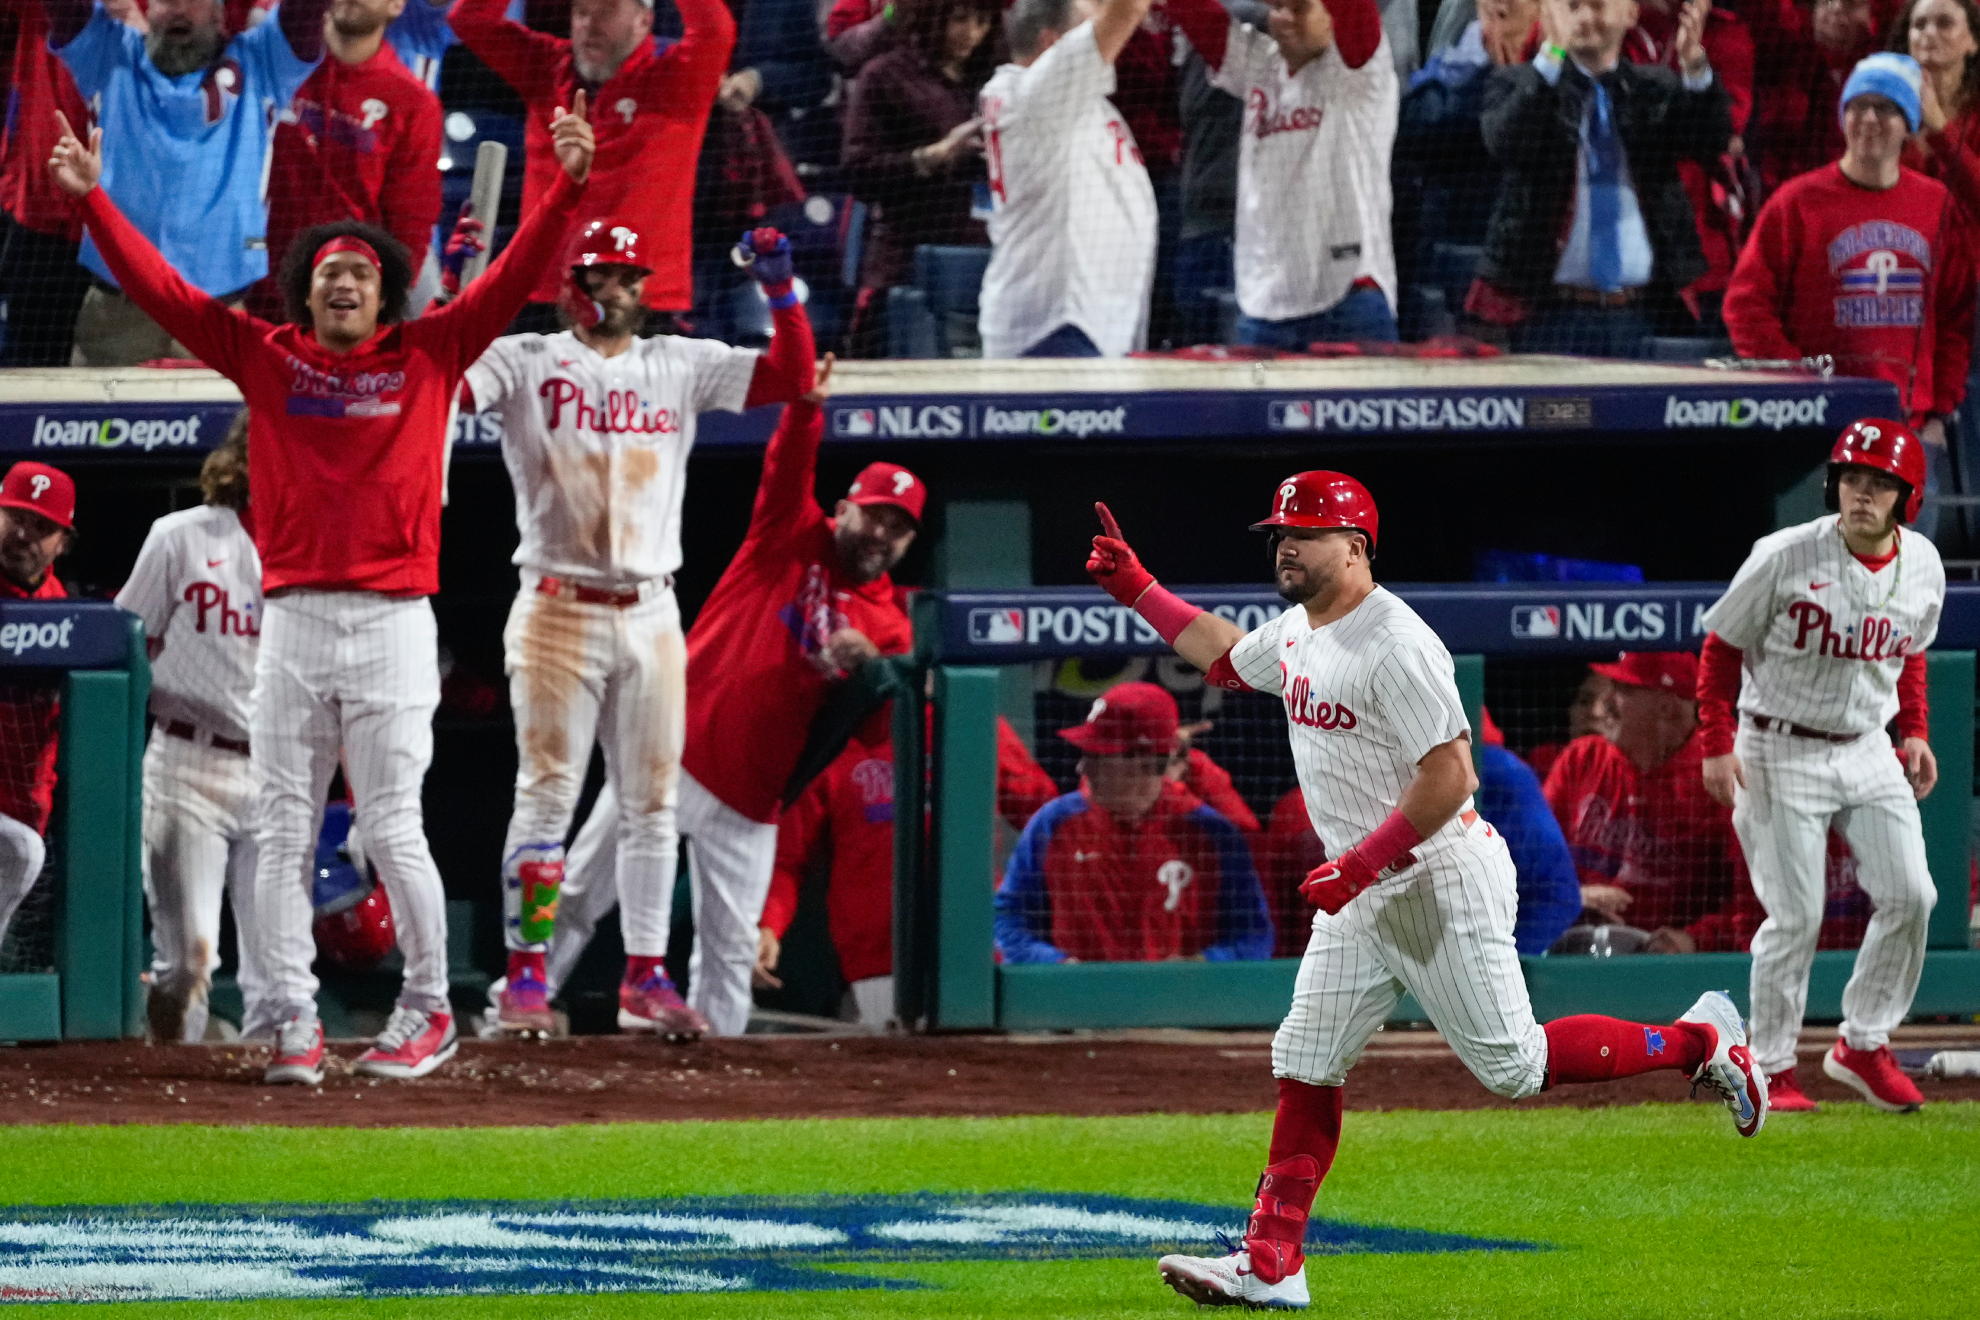 Phillies fan gets smashed by security as field invasion goes disastrously wrong